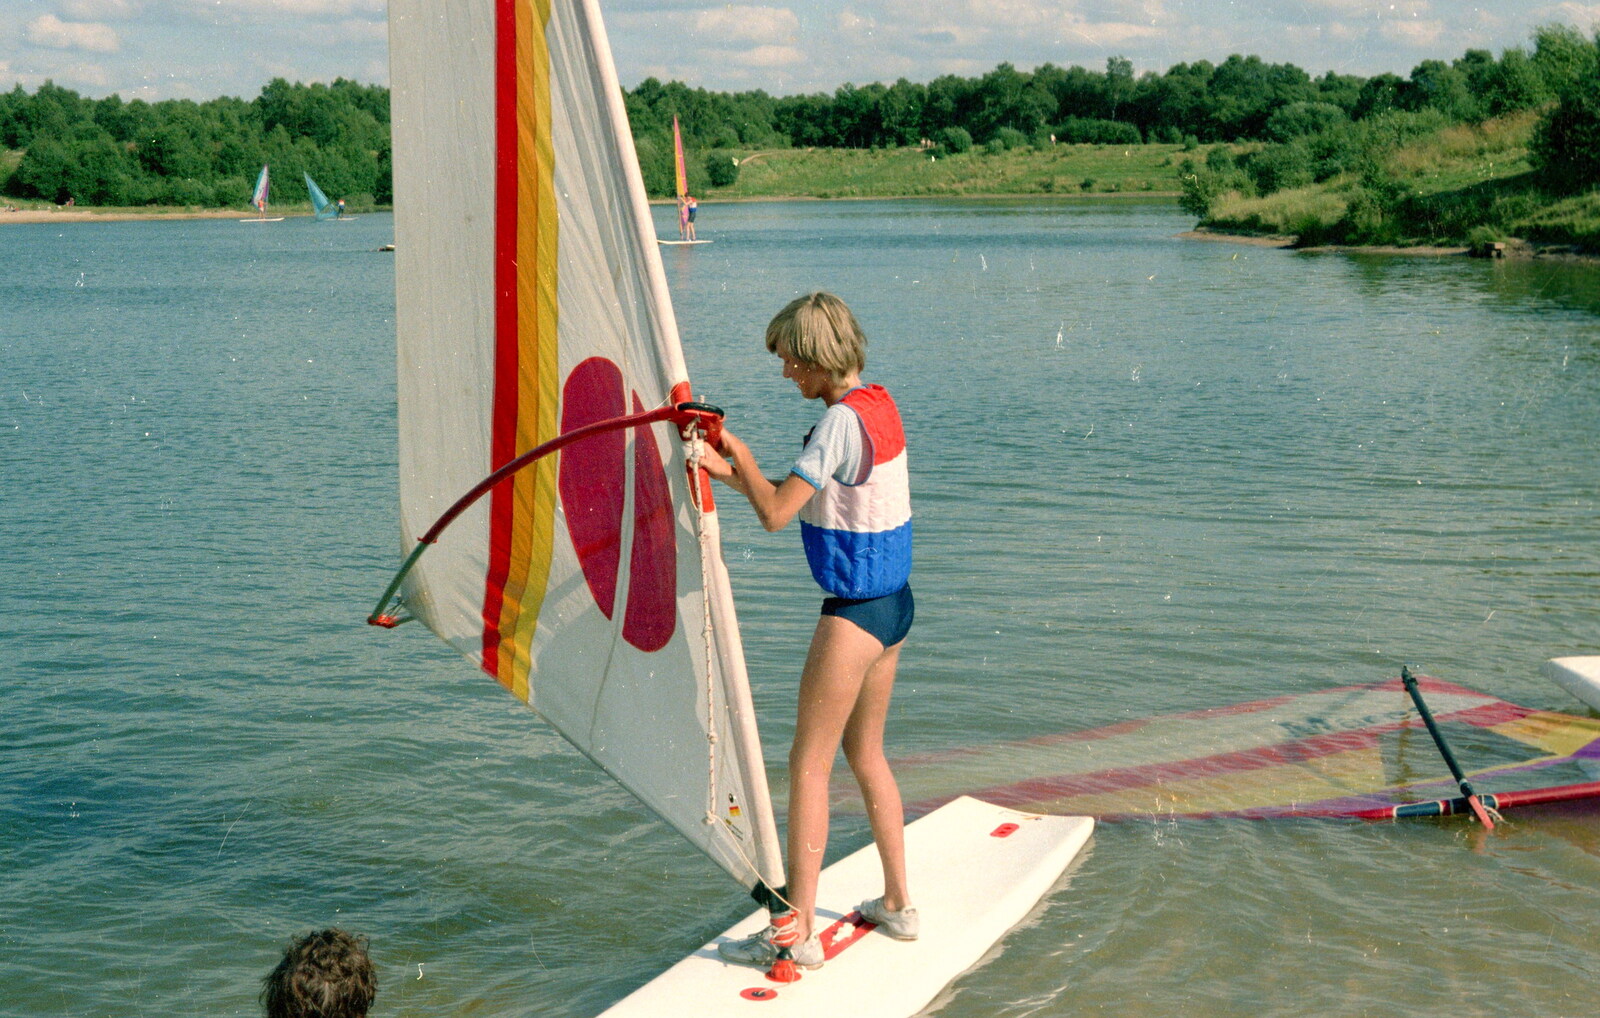 Nosher on a windsurfer from Nosher Goes Windsurfing, Macclesfield, Cheshire - 20th June 1985